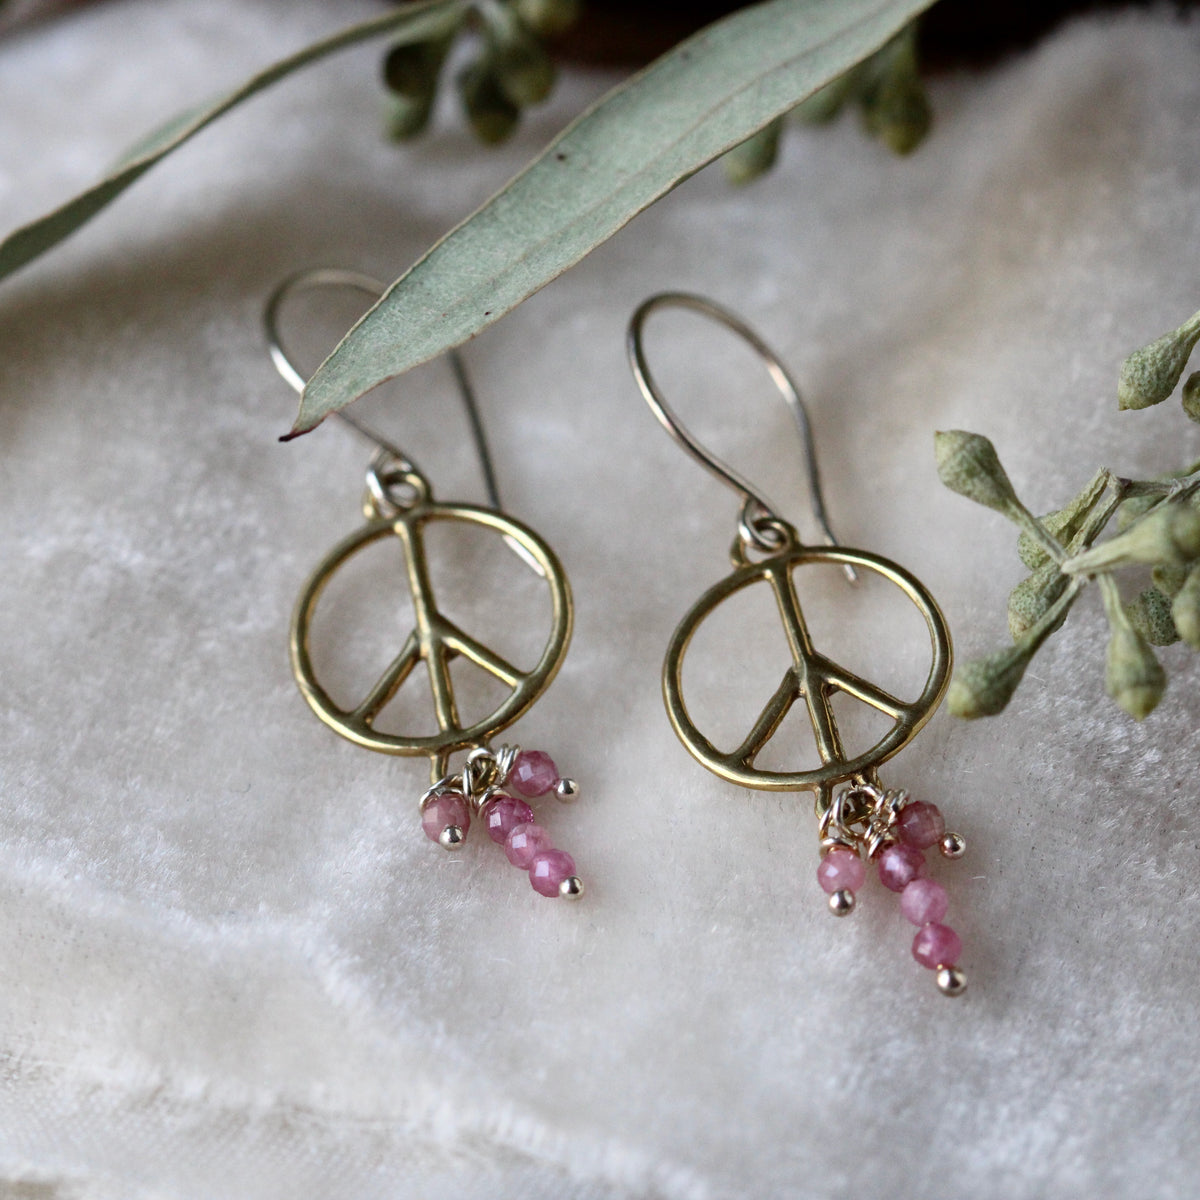 Bronze Peace symbol dangle earrings sterling and pink tourmaline